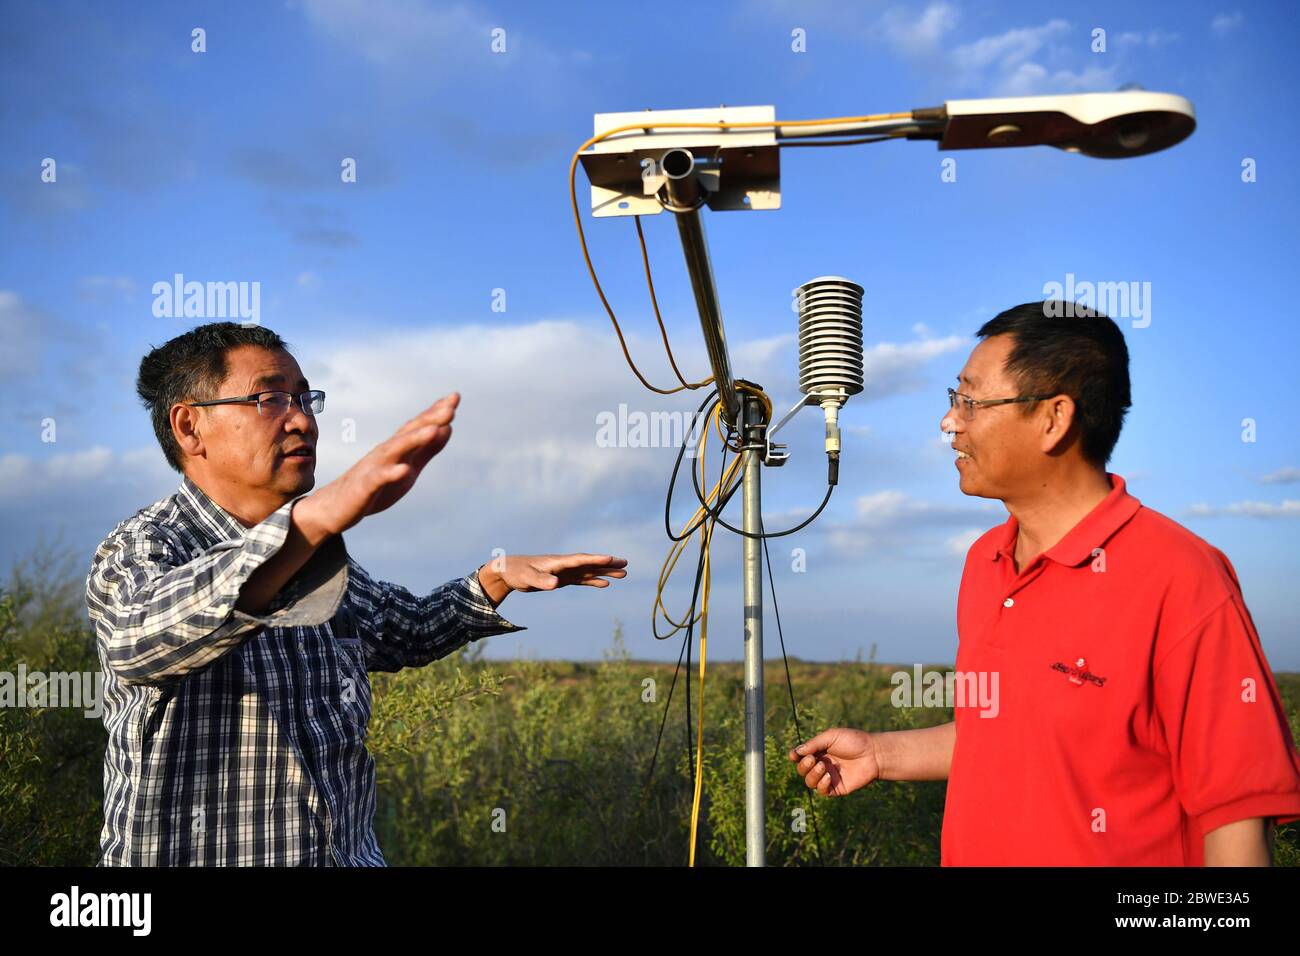 (200601) -- SHENMU, June 1, 2020 (Xinhua) -- Zhang Yinglong (R) and a scientist discuss about soil moisture at Gechougou Village, Shenmu County of northwest China's Shaanxi Province, May 27, 2020. In 2003, Zhang Yinglong resigned his work and returned to his hometown Shenmu County, which located in an isolated desert. He contracted a land of 192,000 Mu (about 12,800 hectares) and made up his mind to plant trees and control sands here. Over the 17 years, Zhang has contracted accumulated 428,000 Mu (about 28,533 hectares) of lands and developed ecological planting and livestock raising industrie Stock Photo